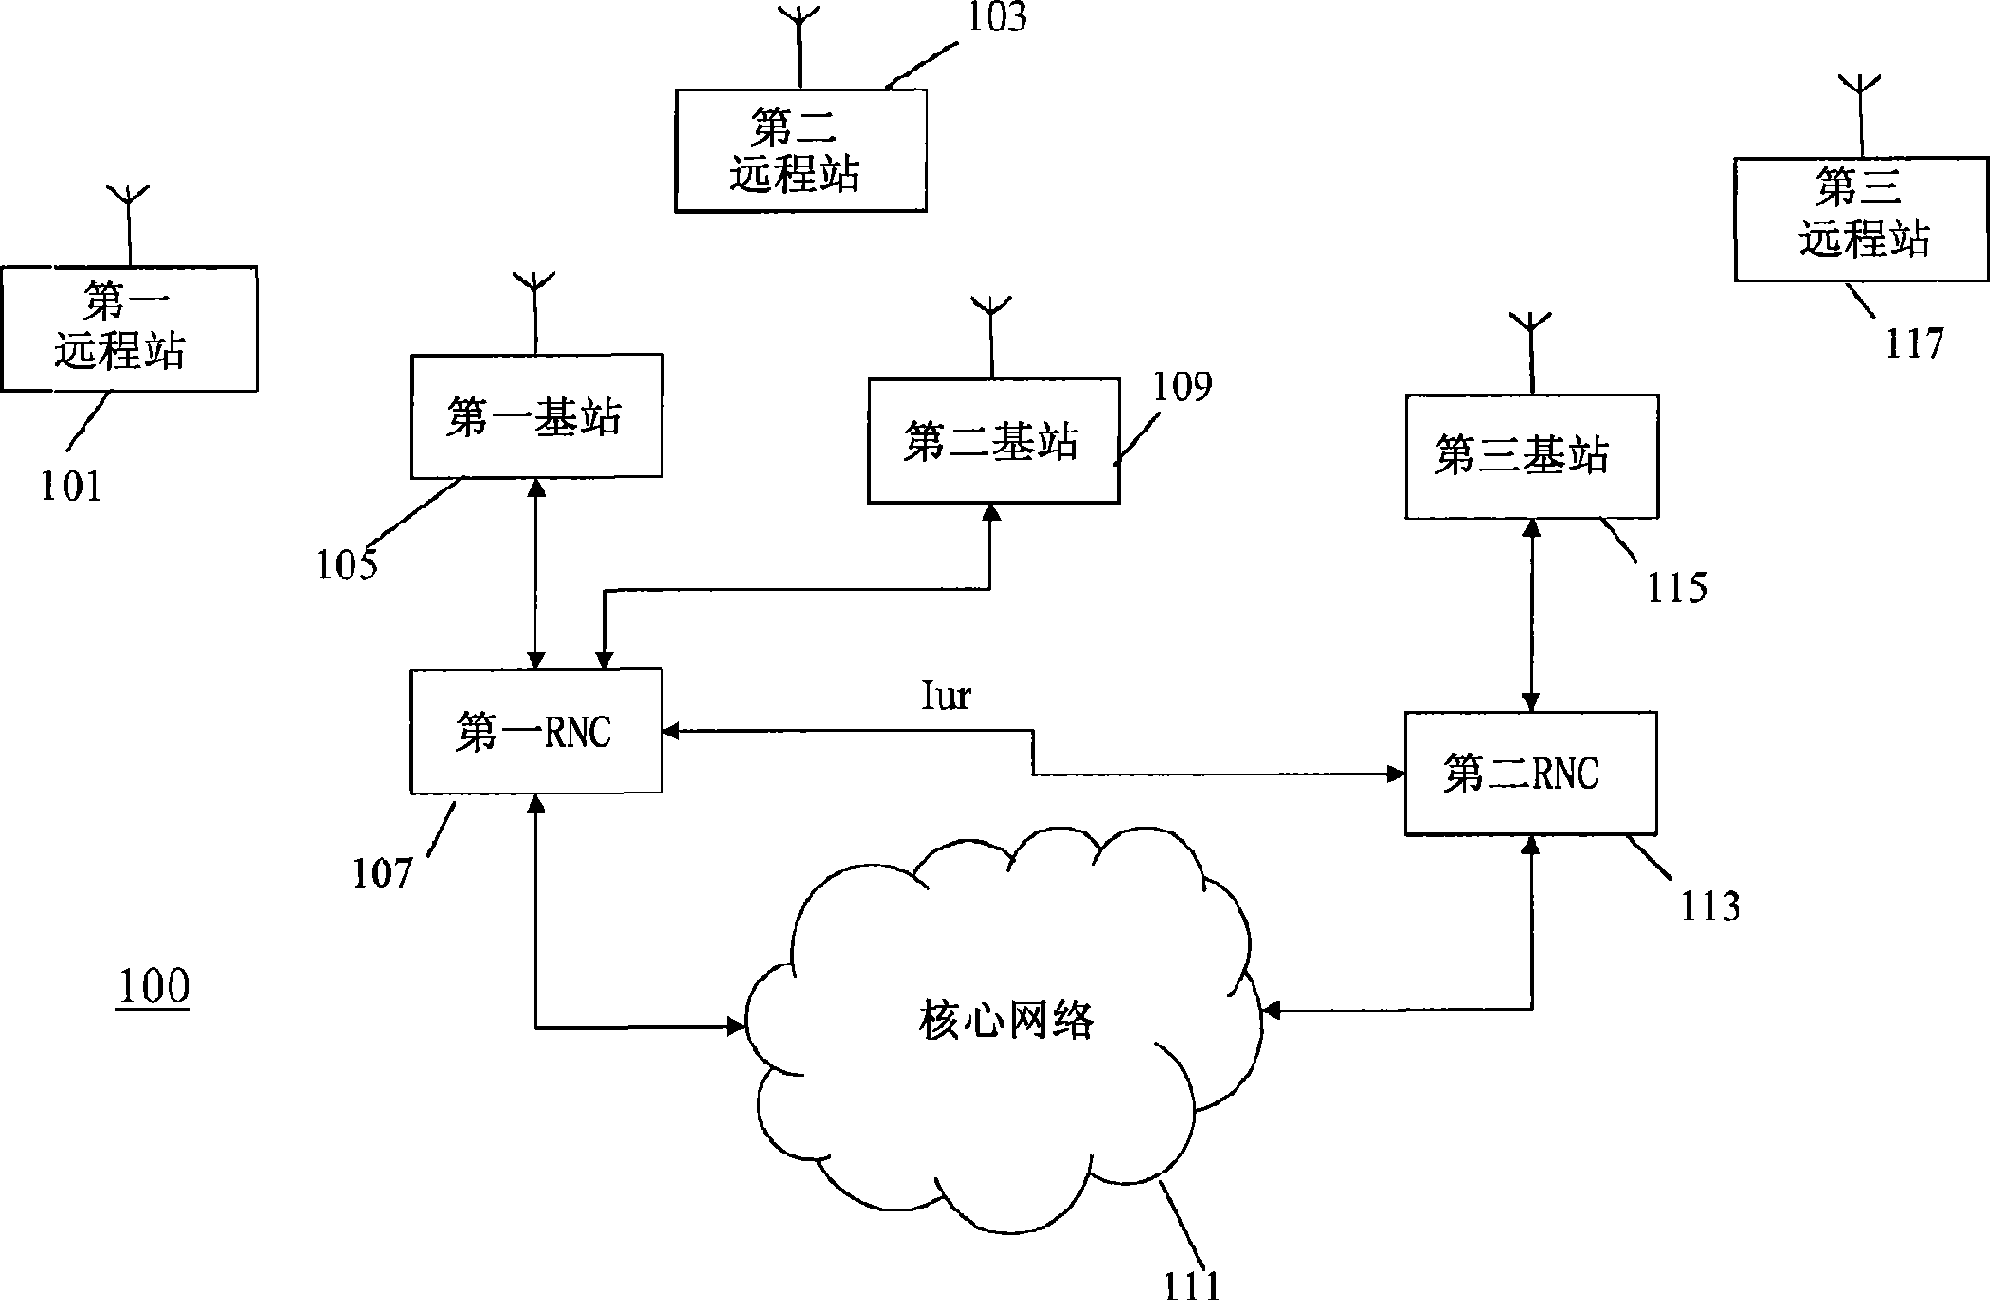 High speed downlink packet access communication in a cellular communication system